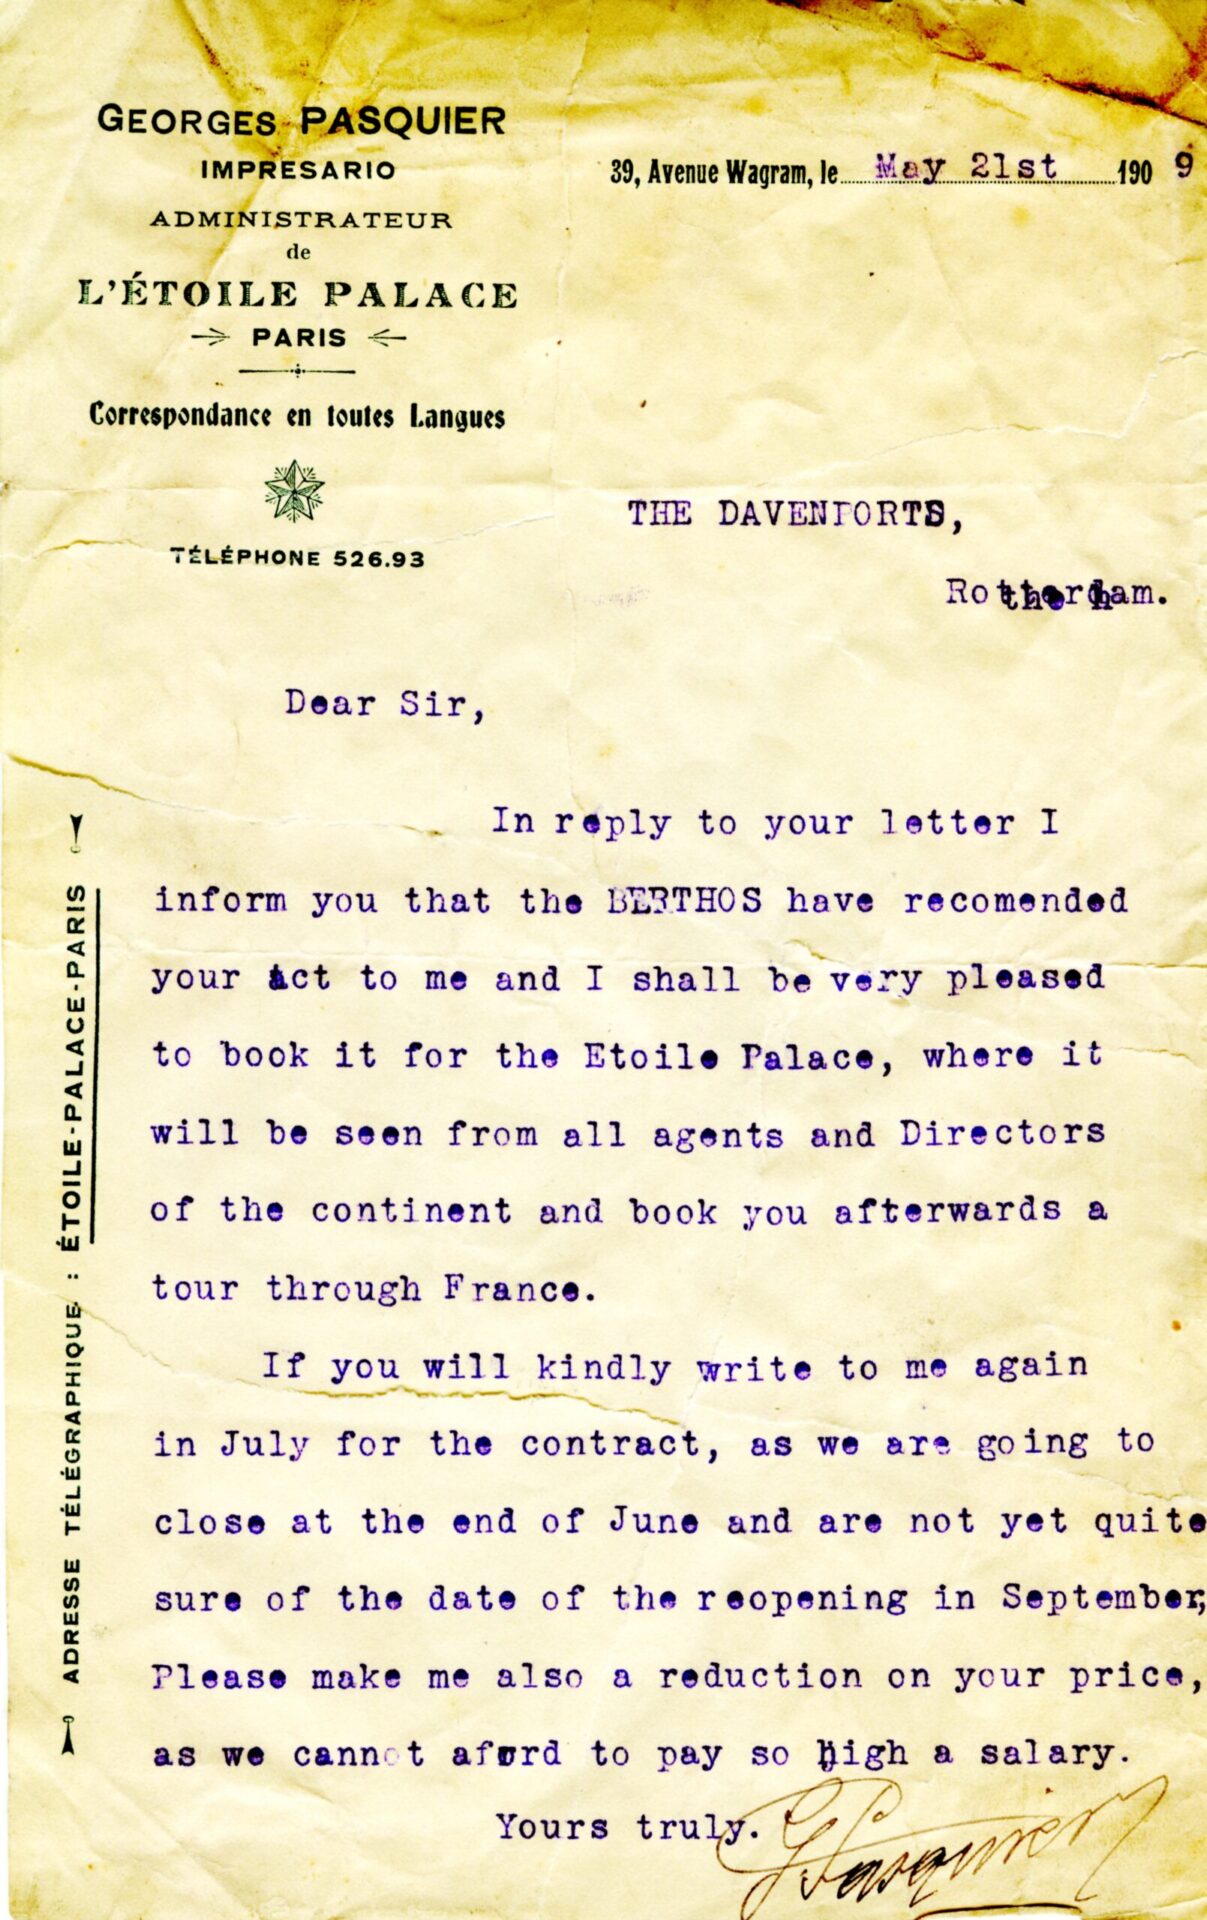 1909 letter to The Davenports concerning possible bookings at L’Etoile Palace, Paris